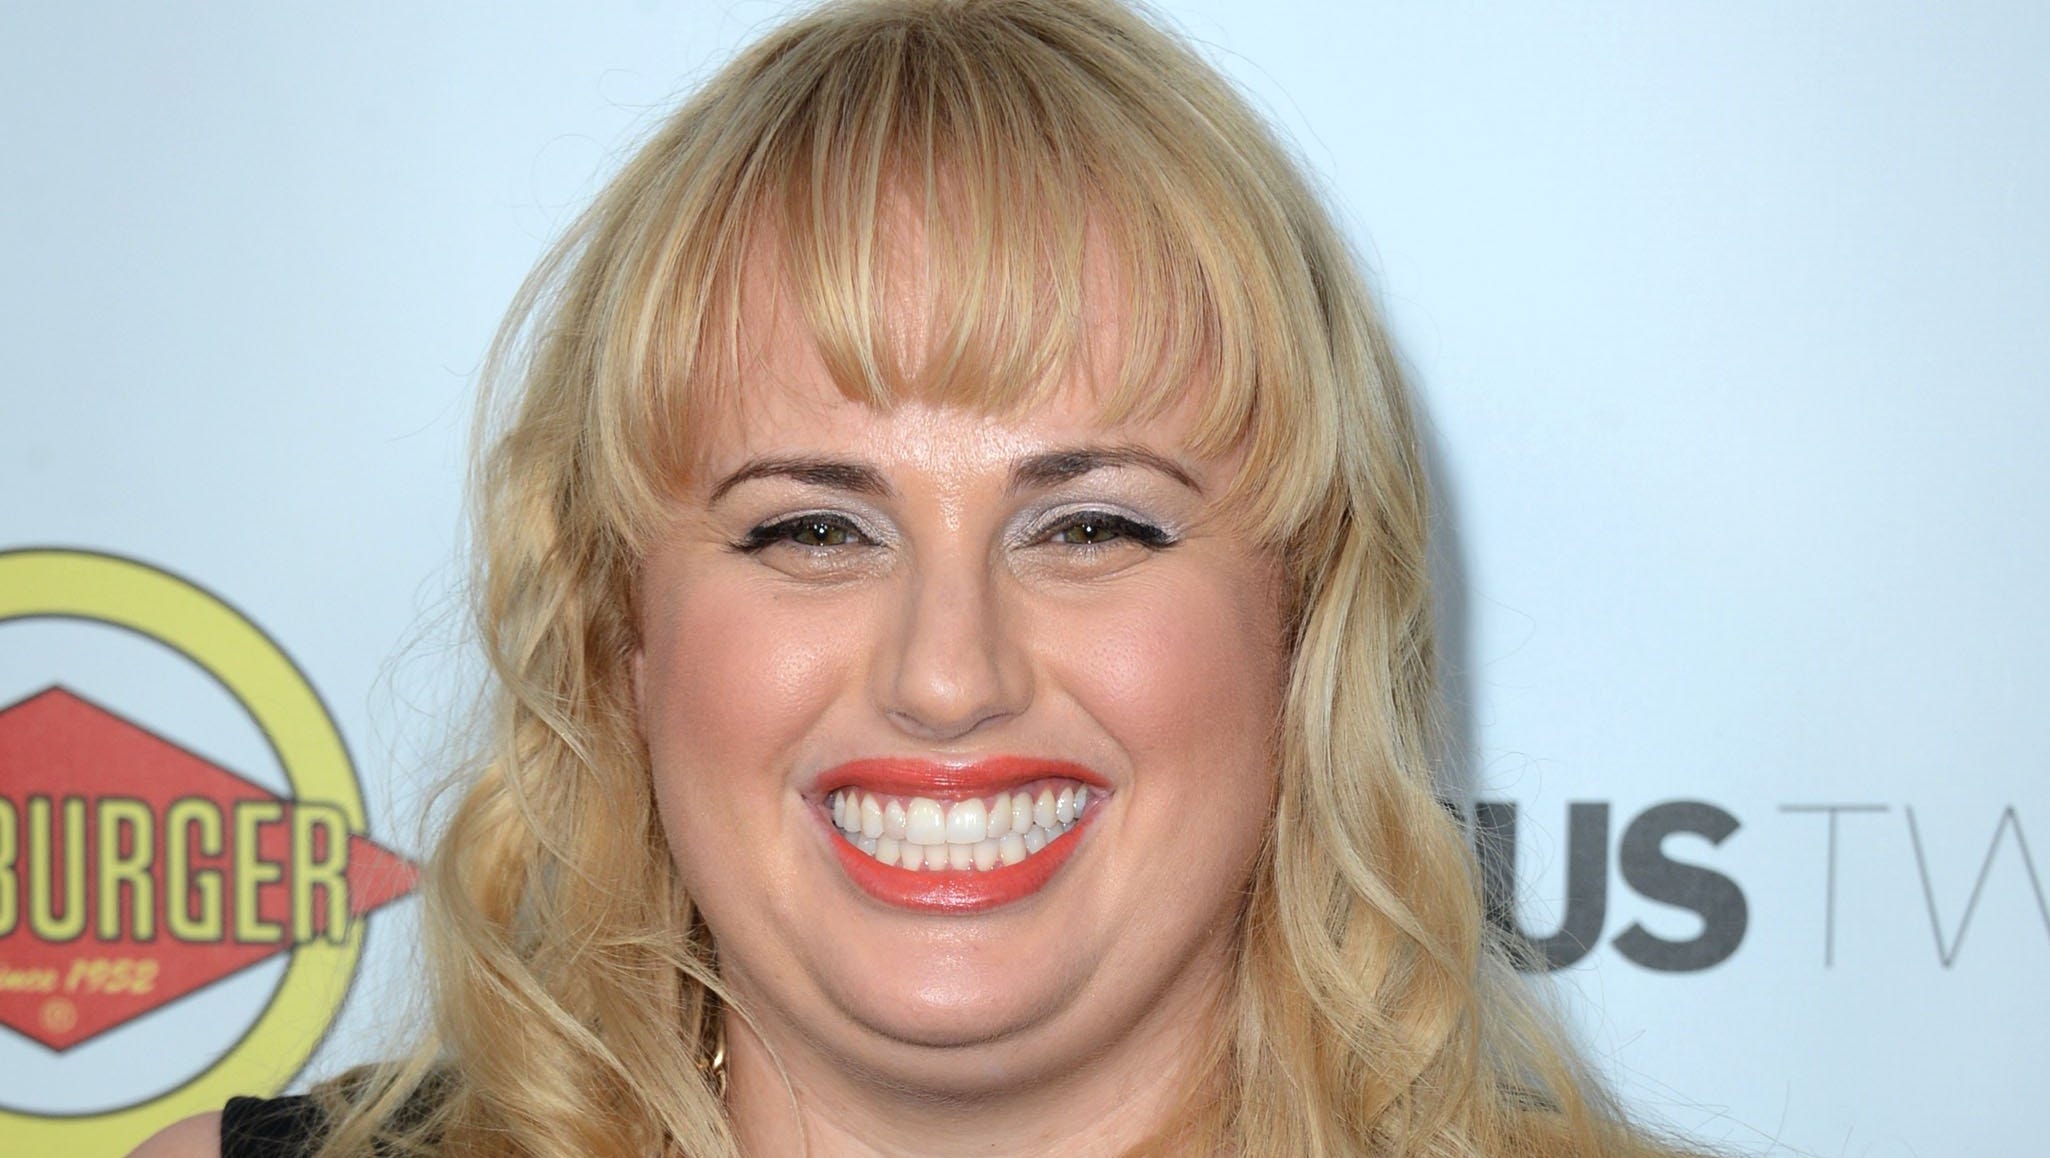 Are fat girls funny? Rebel Wilson says yes